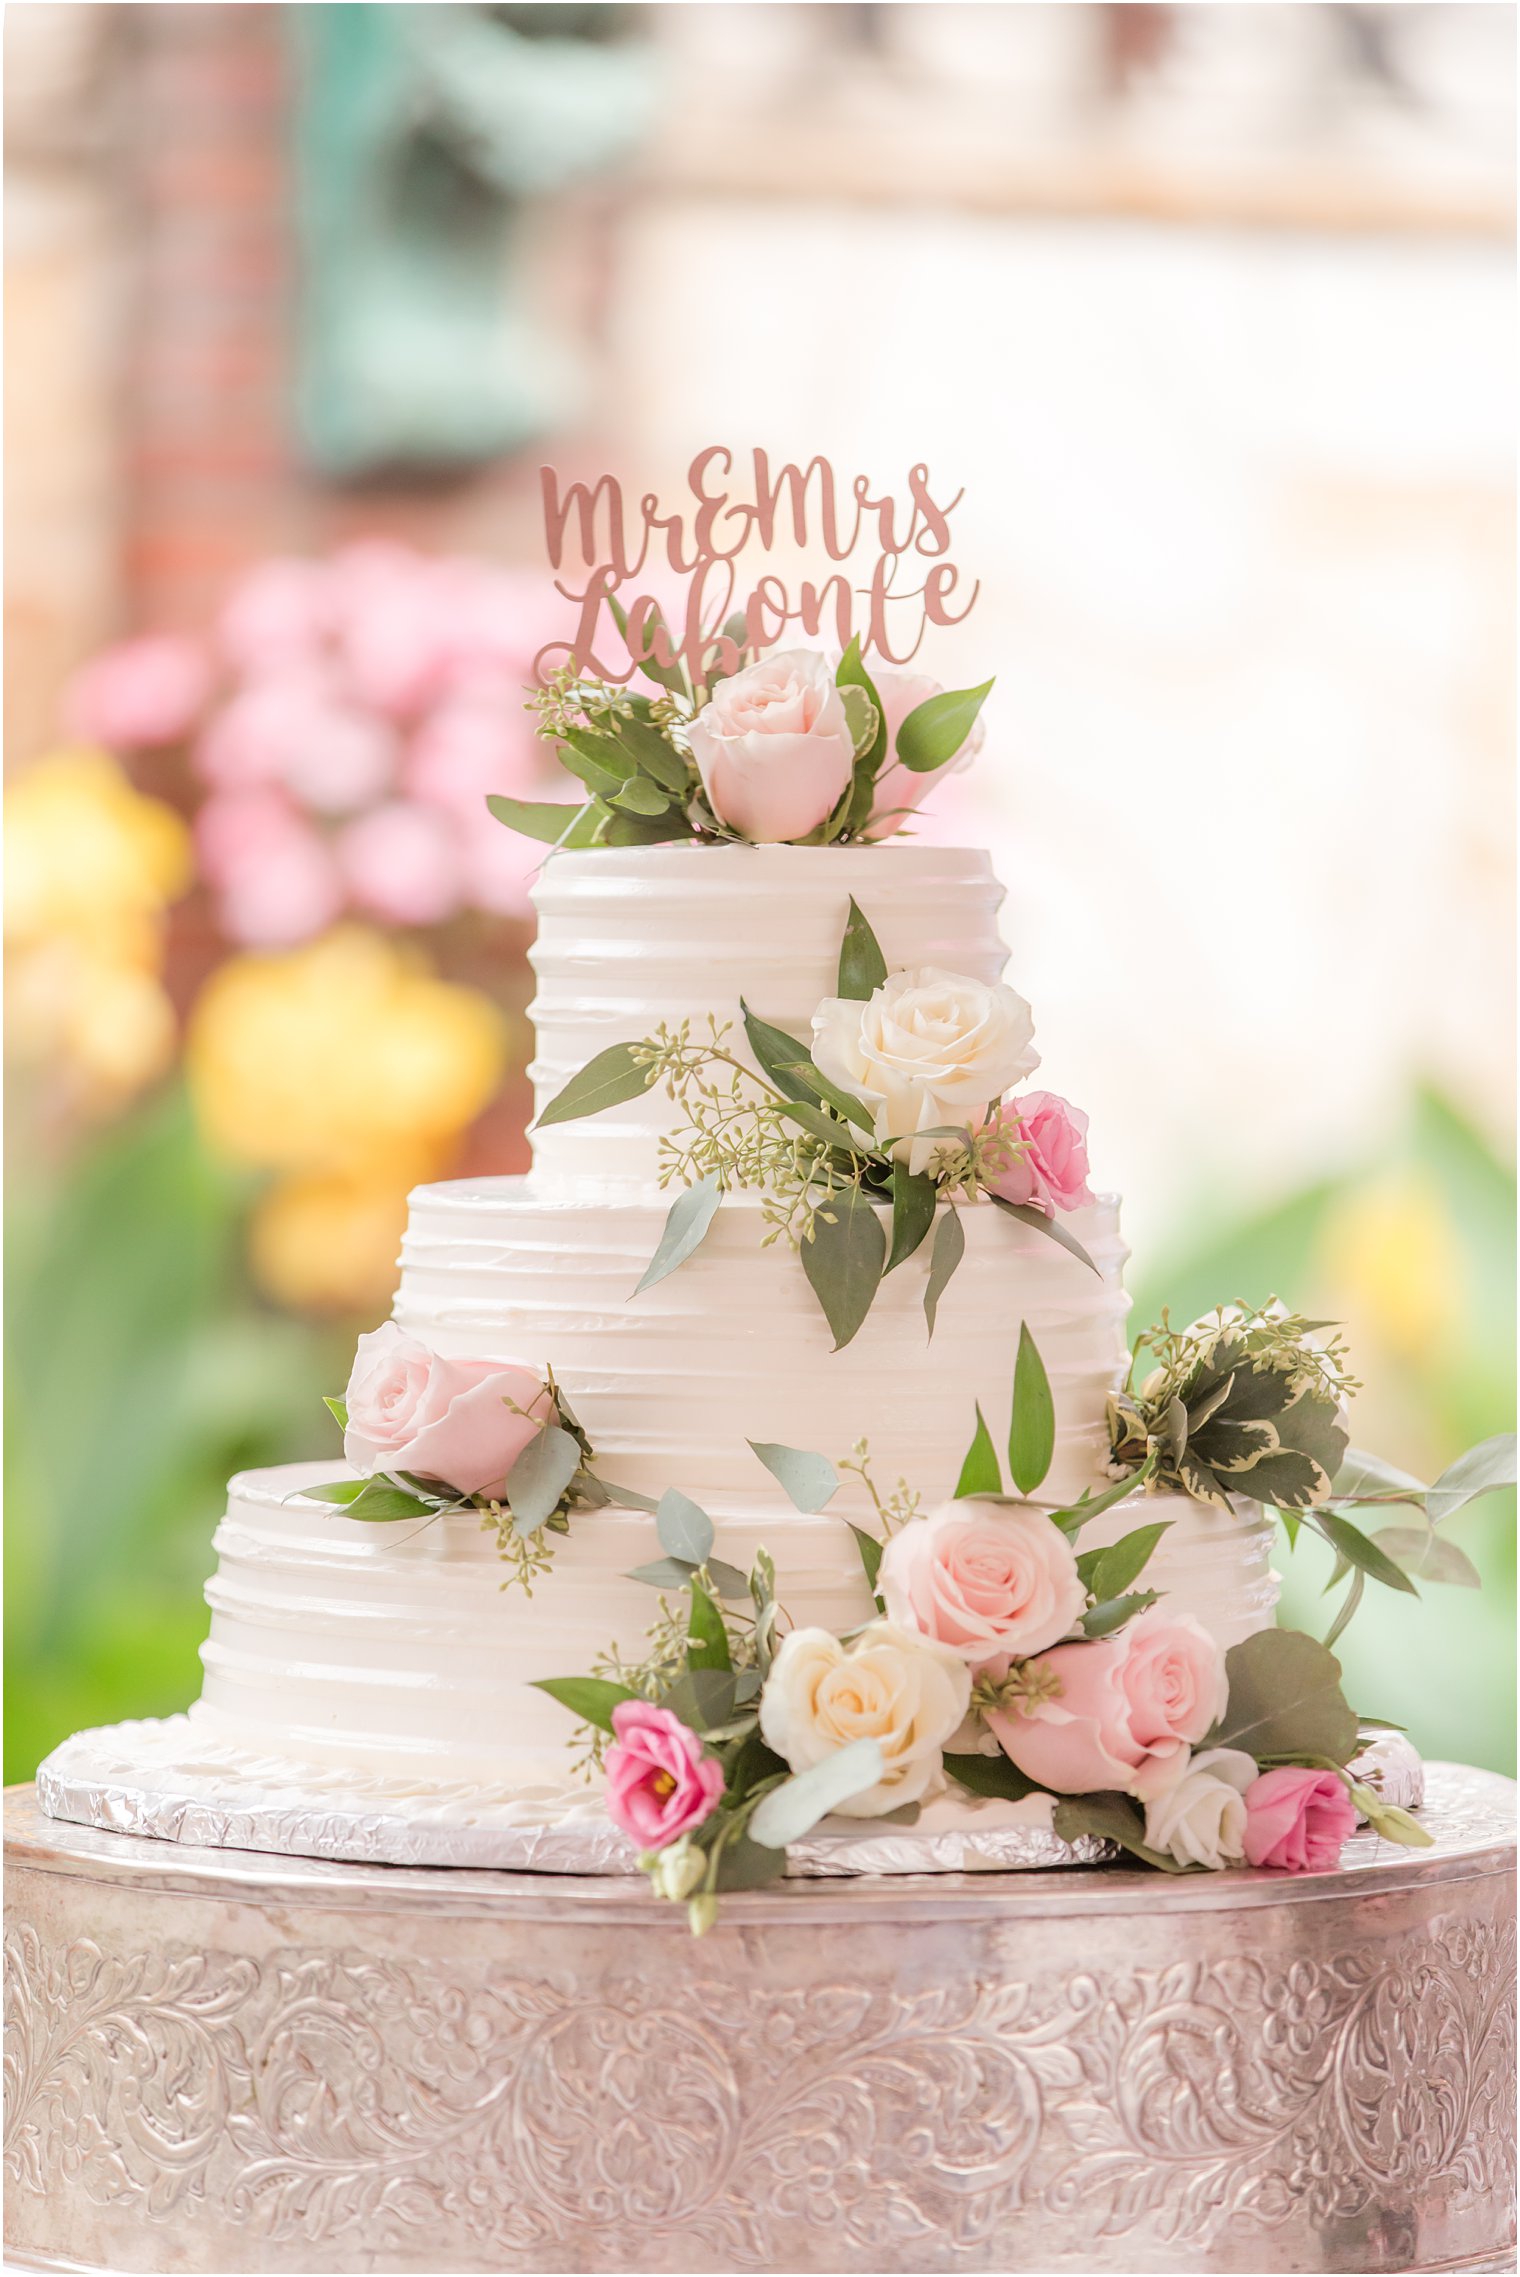 Wedding cake with florals by The Manor